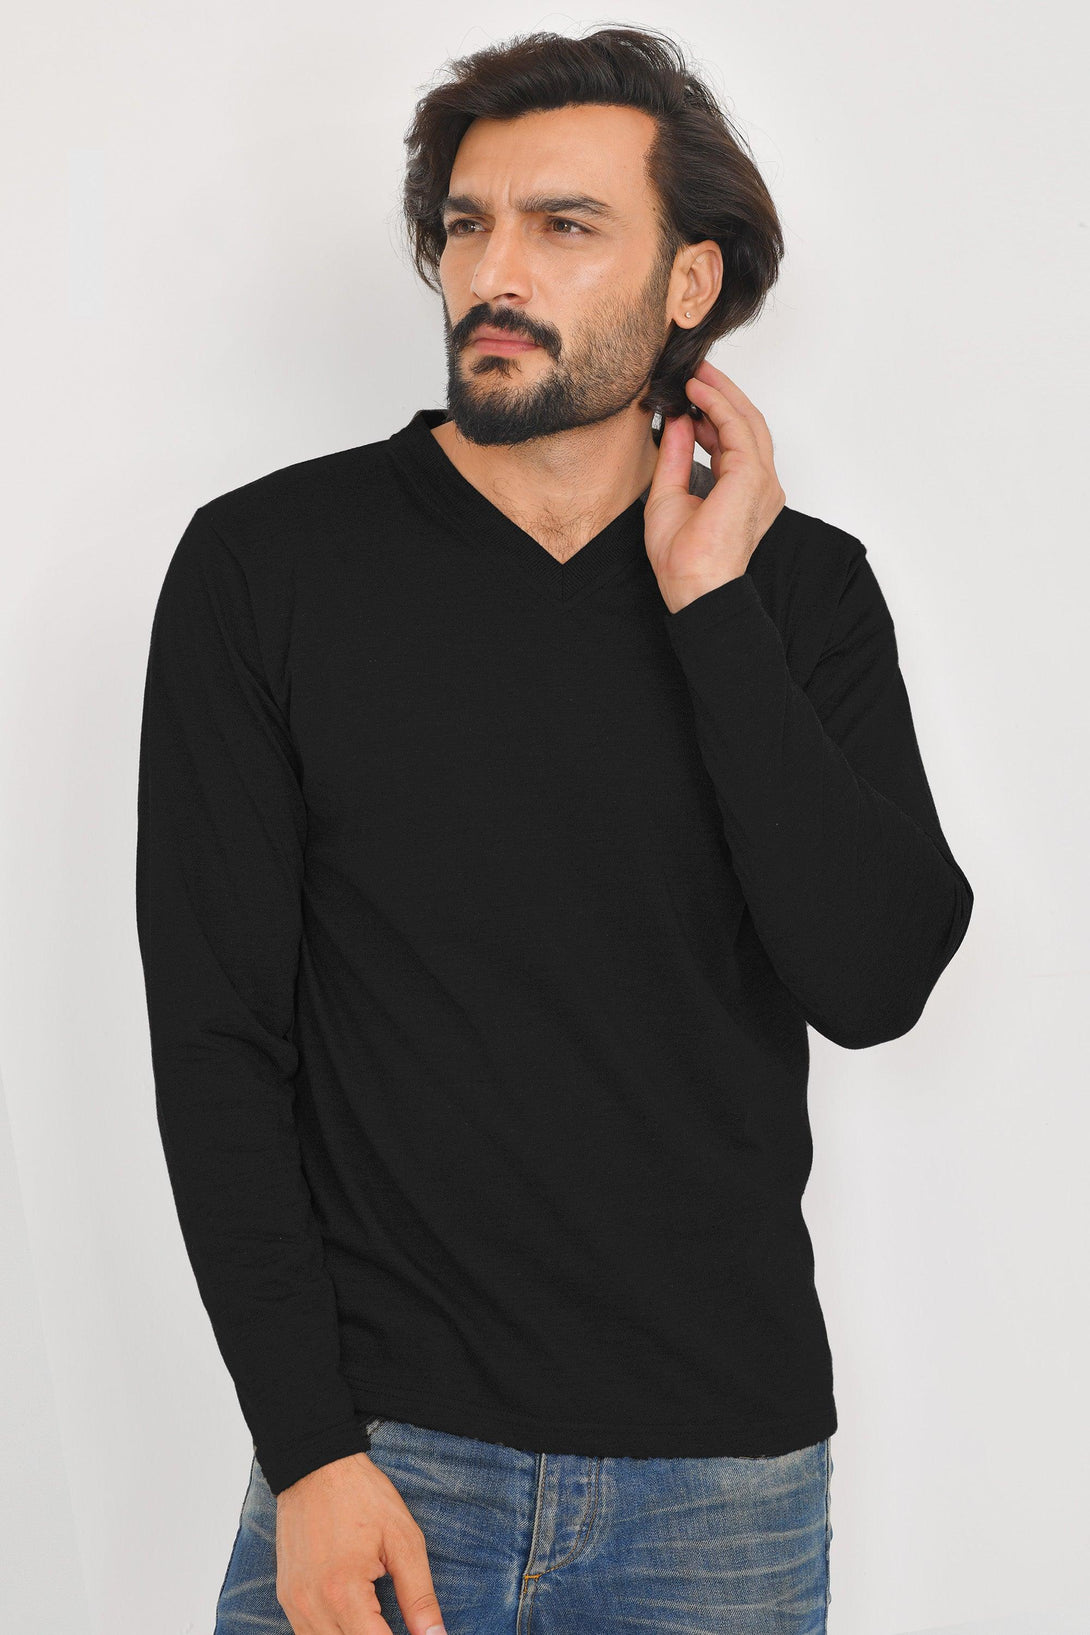 V-Neck Long Sleeve T-Shirts | FOREST GREEN - BLACK - MAROON - NAVY - Pack of 4 - FTS